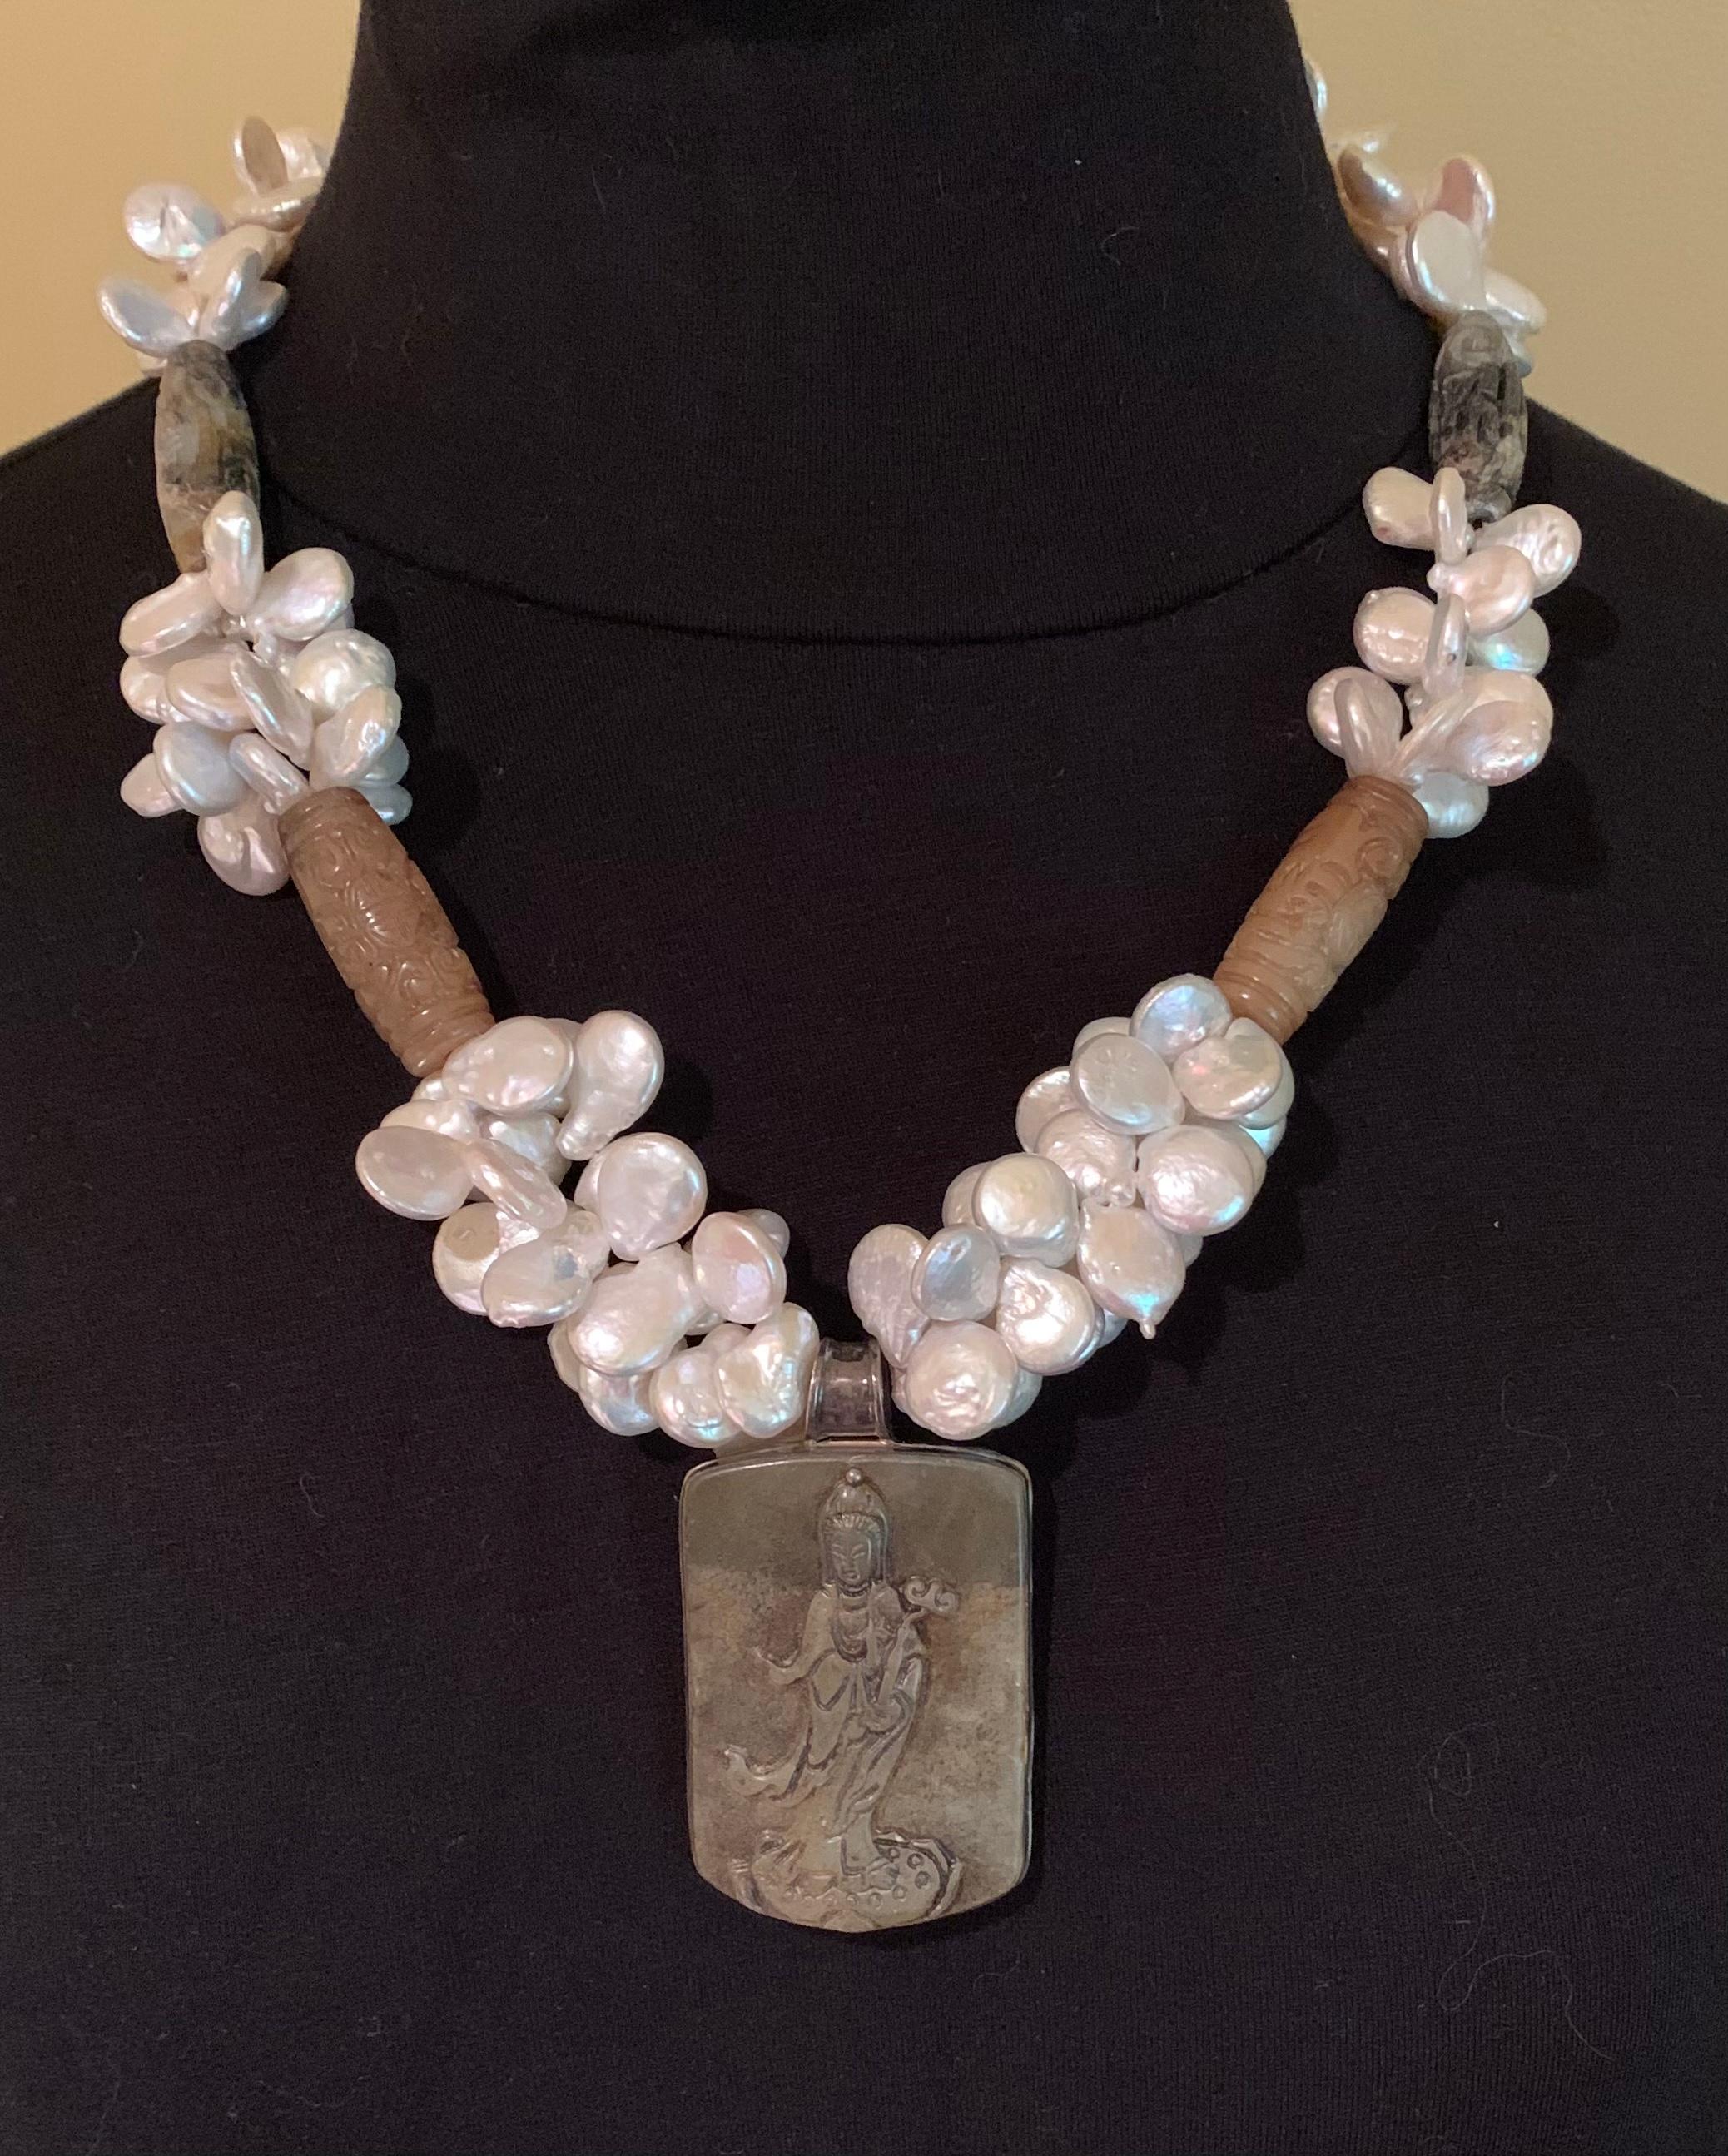 Estate A. Jeschel Asian motif jade, Keshi pearl and tiger's eye statement necklace.
The central jade pendant depicting Guan Yin, the Goddess of compassion and wisdom, with a profusion of beautiful Keshi pearls in cloud-like formations above, joined